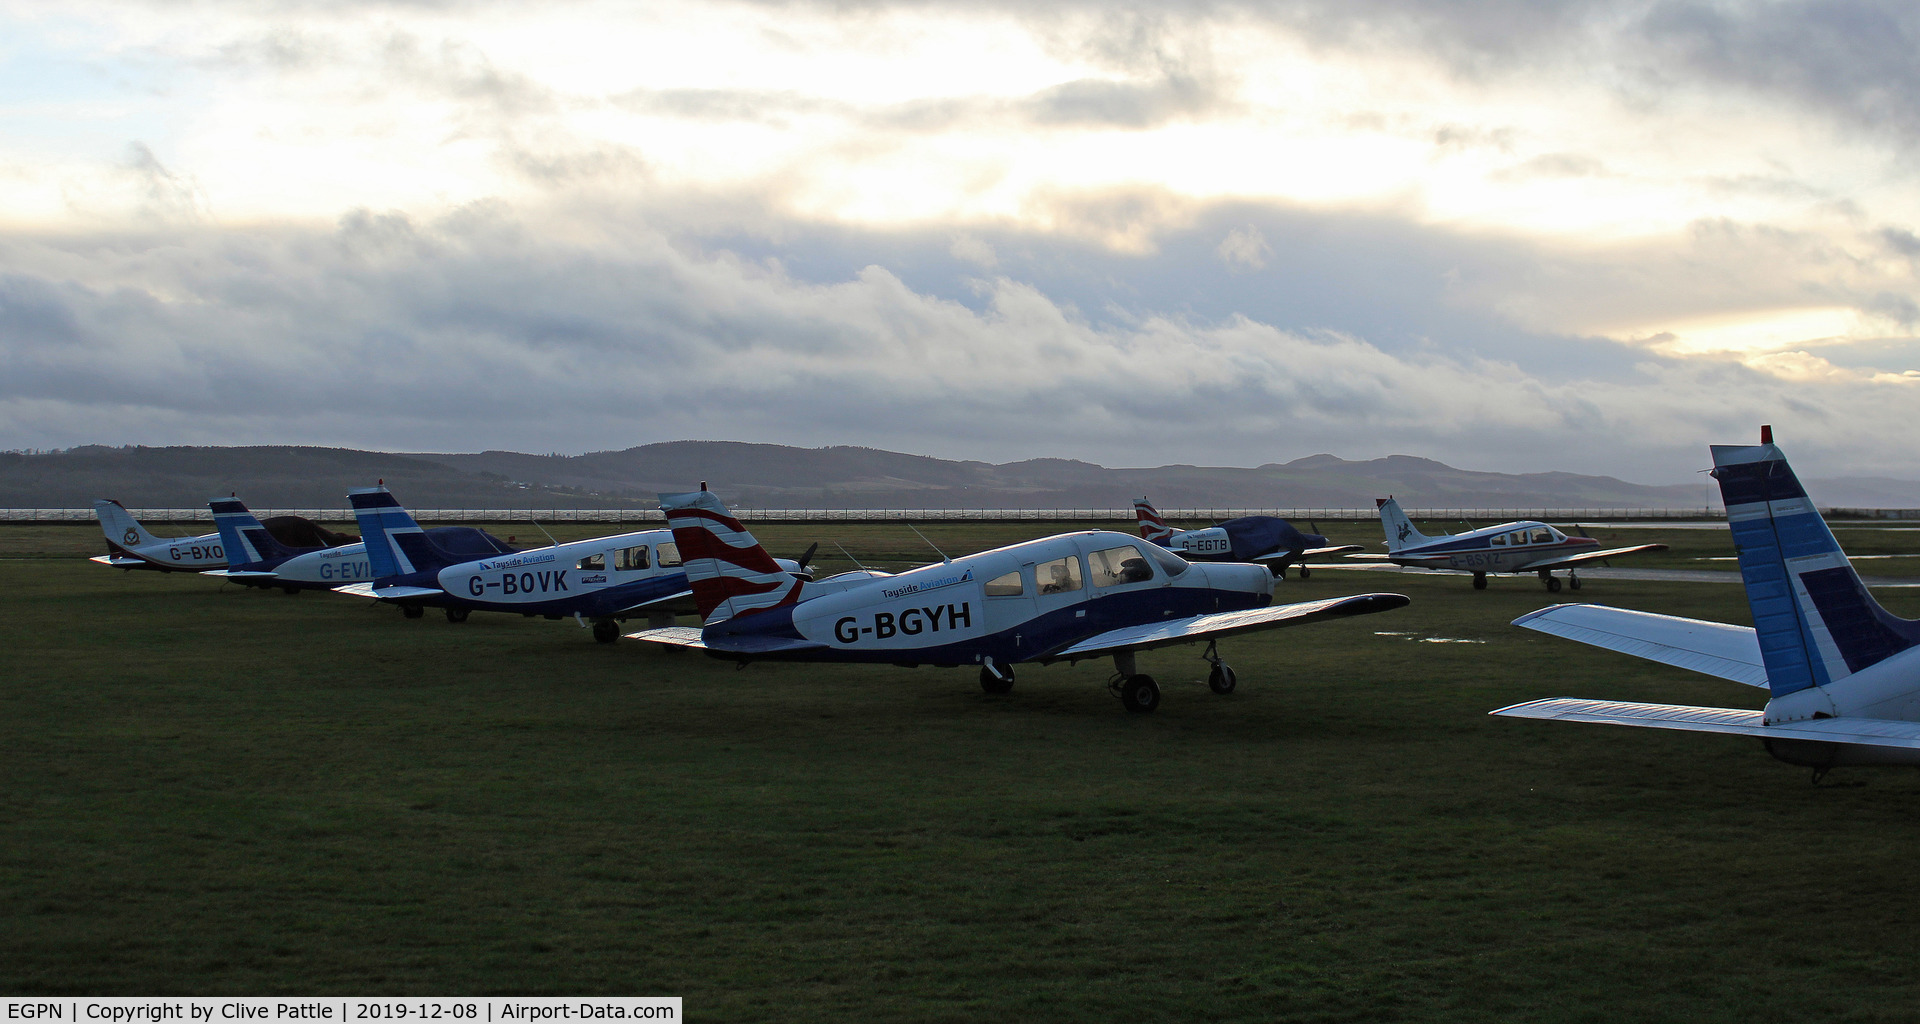 Dundee Airport, Dundee, Scotland United Kingdom (EGPN) - Sunset line-up of Tayside Aviation trainers